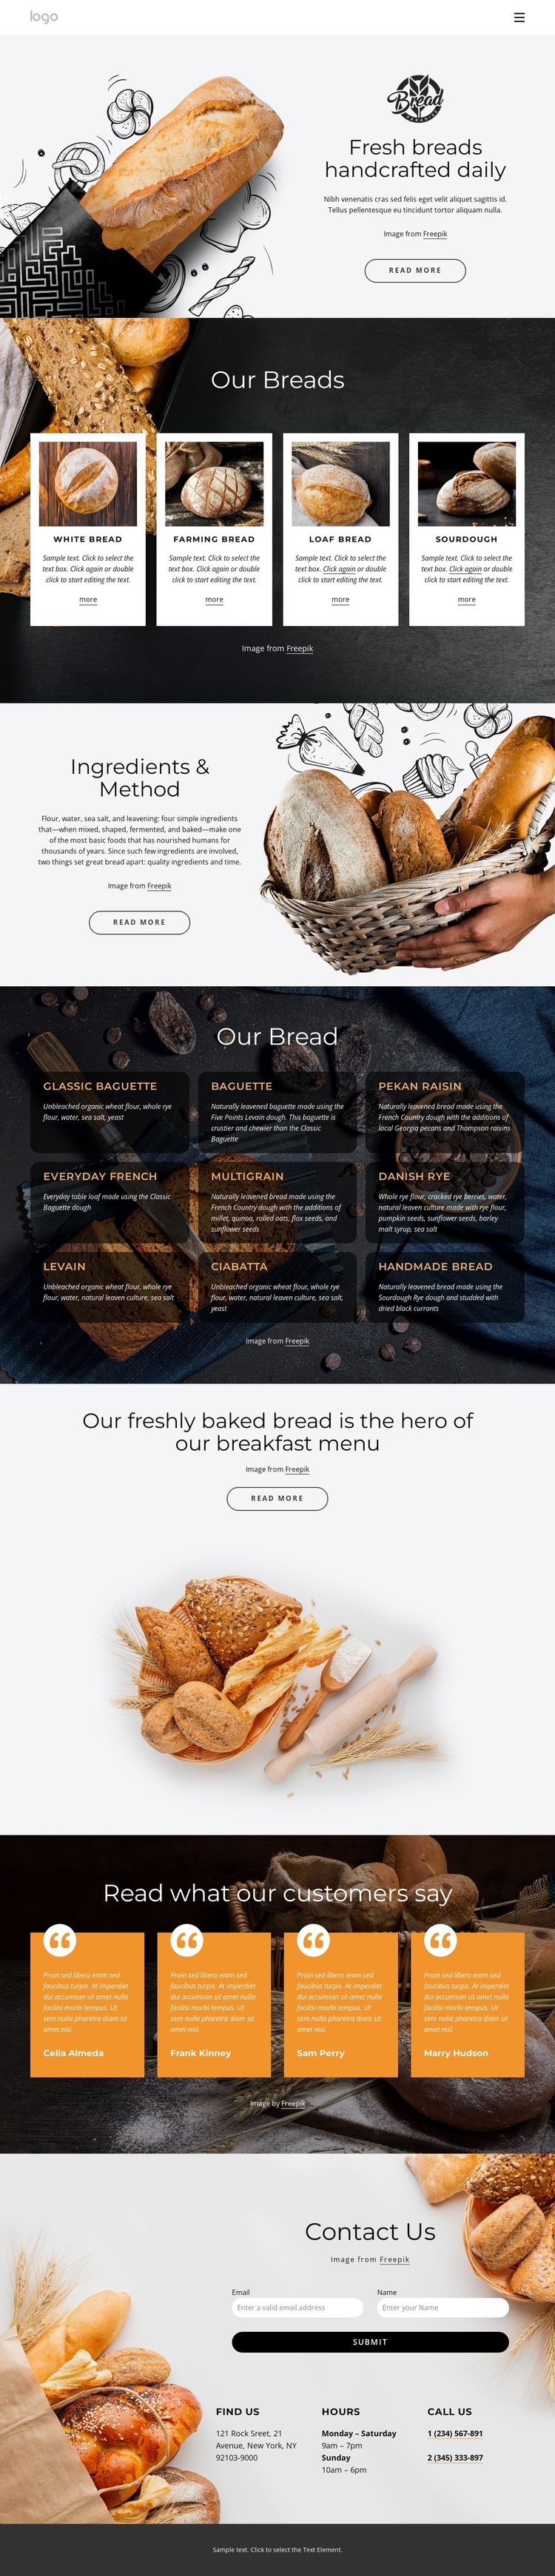 Fresh bread handcrafted every day Joomla Template